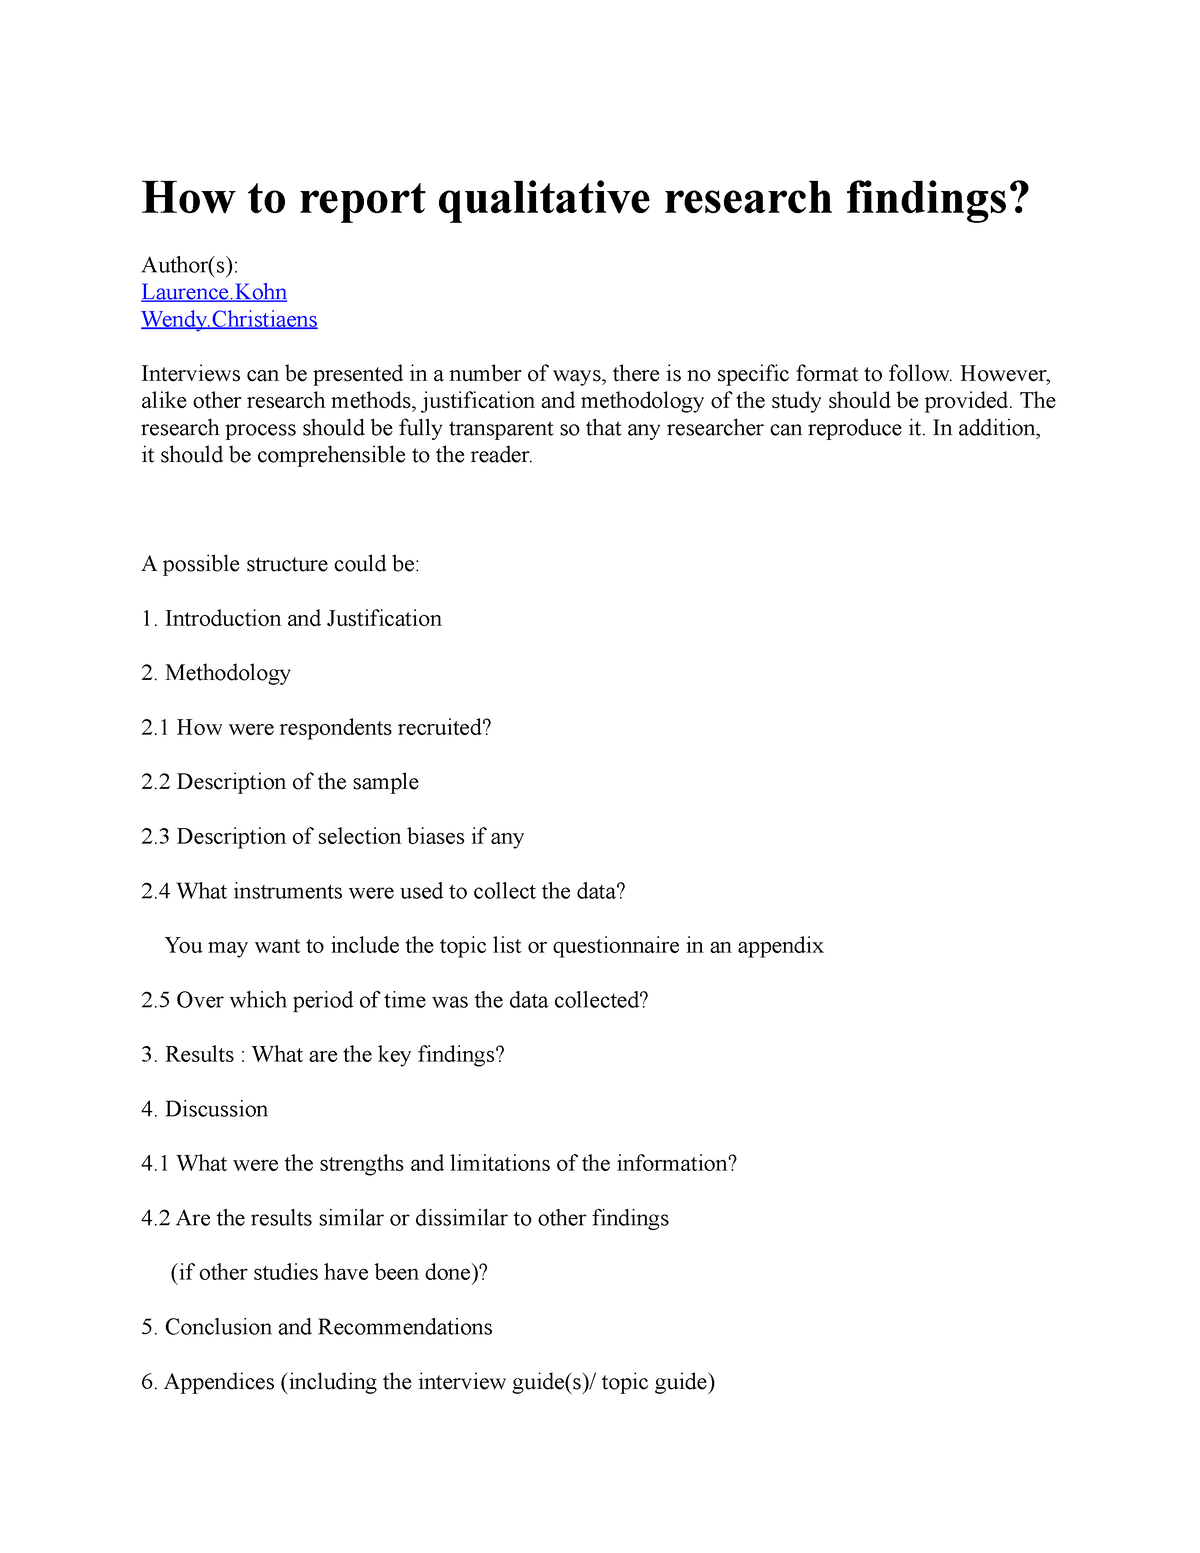 reporting qualitative research findings